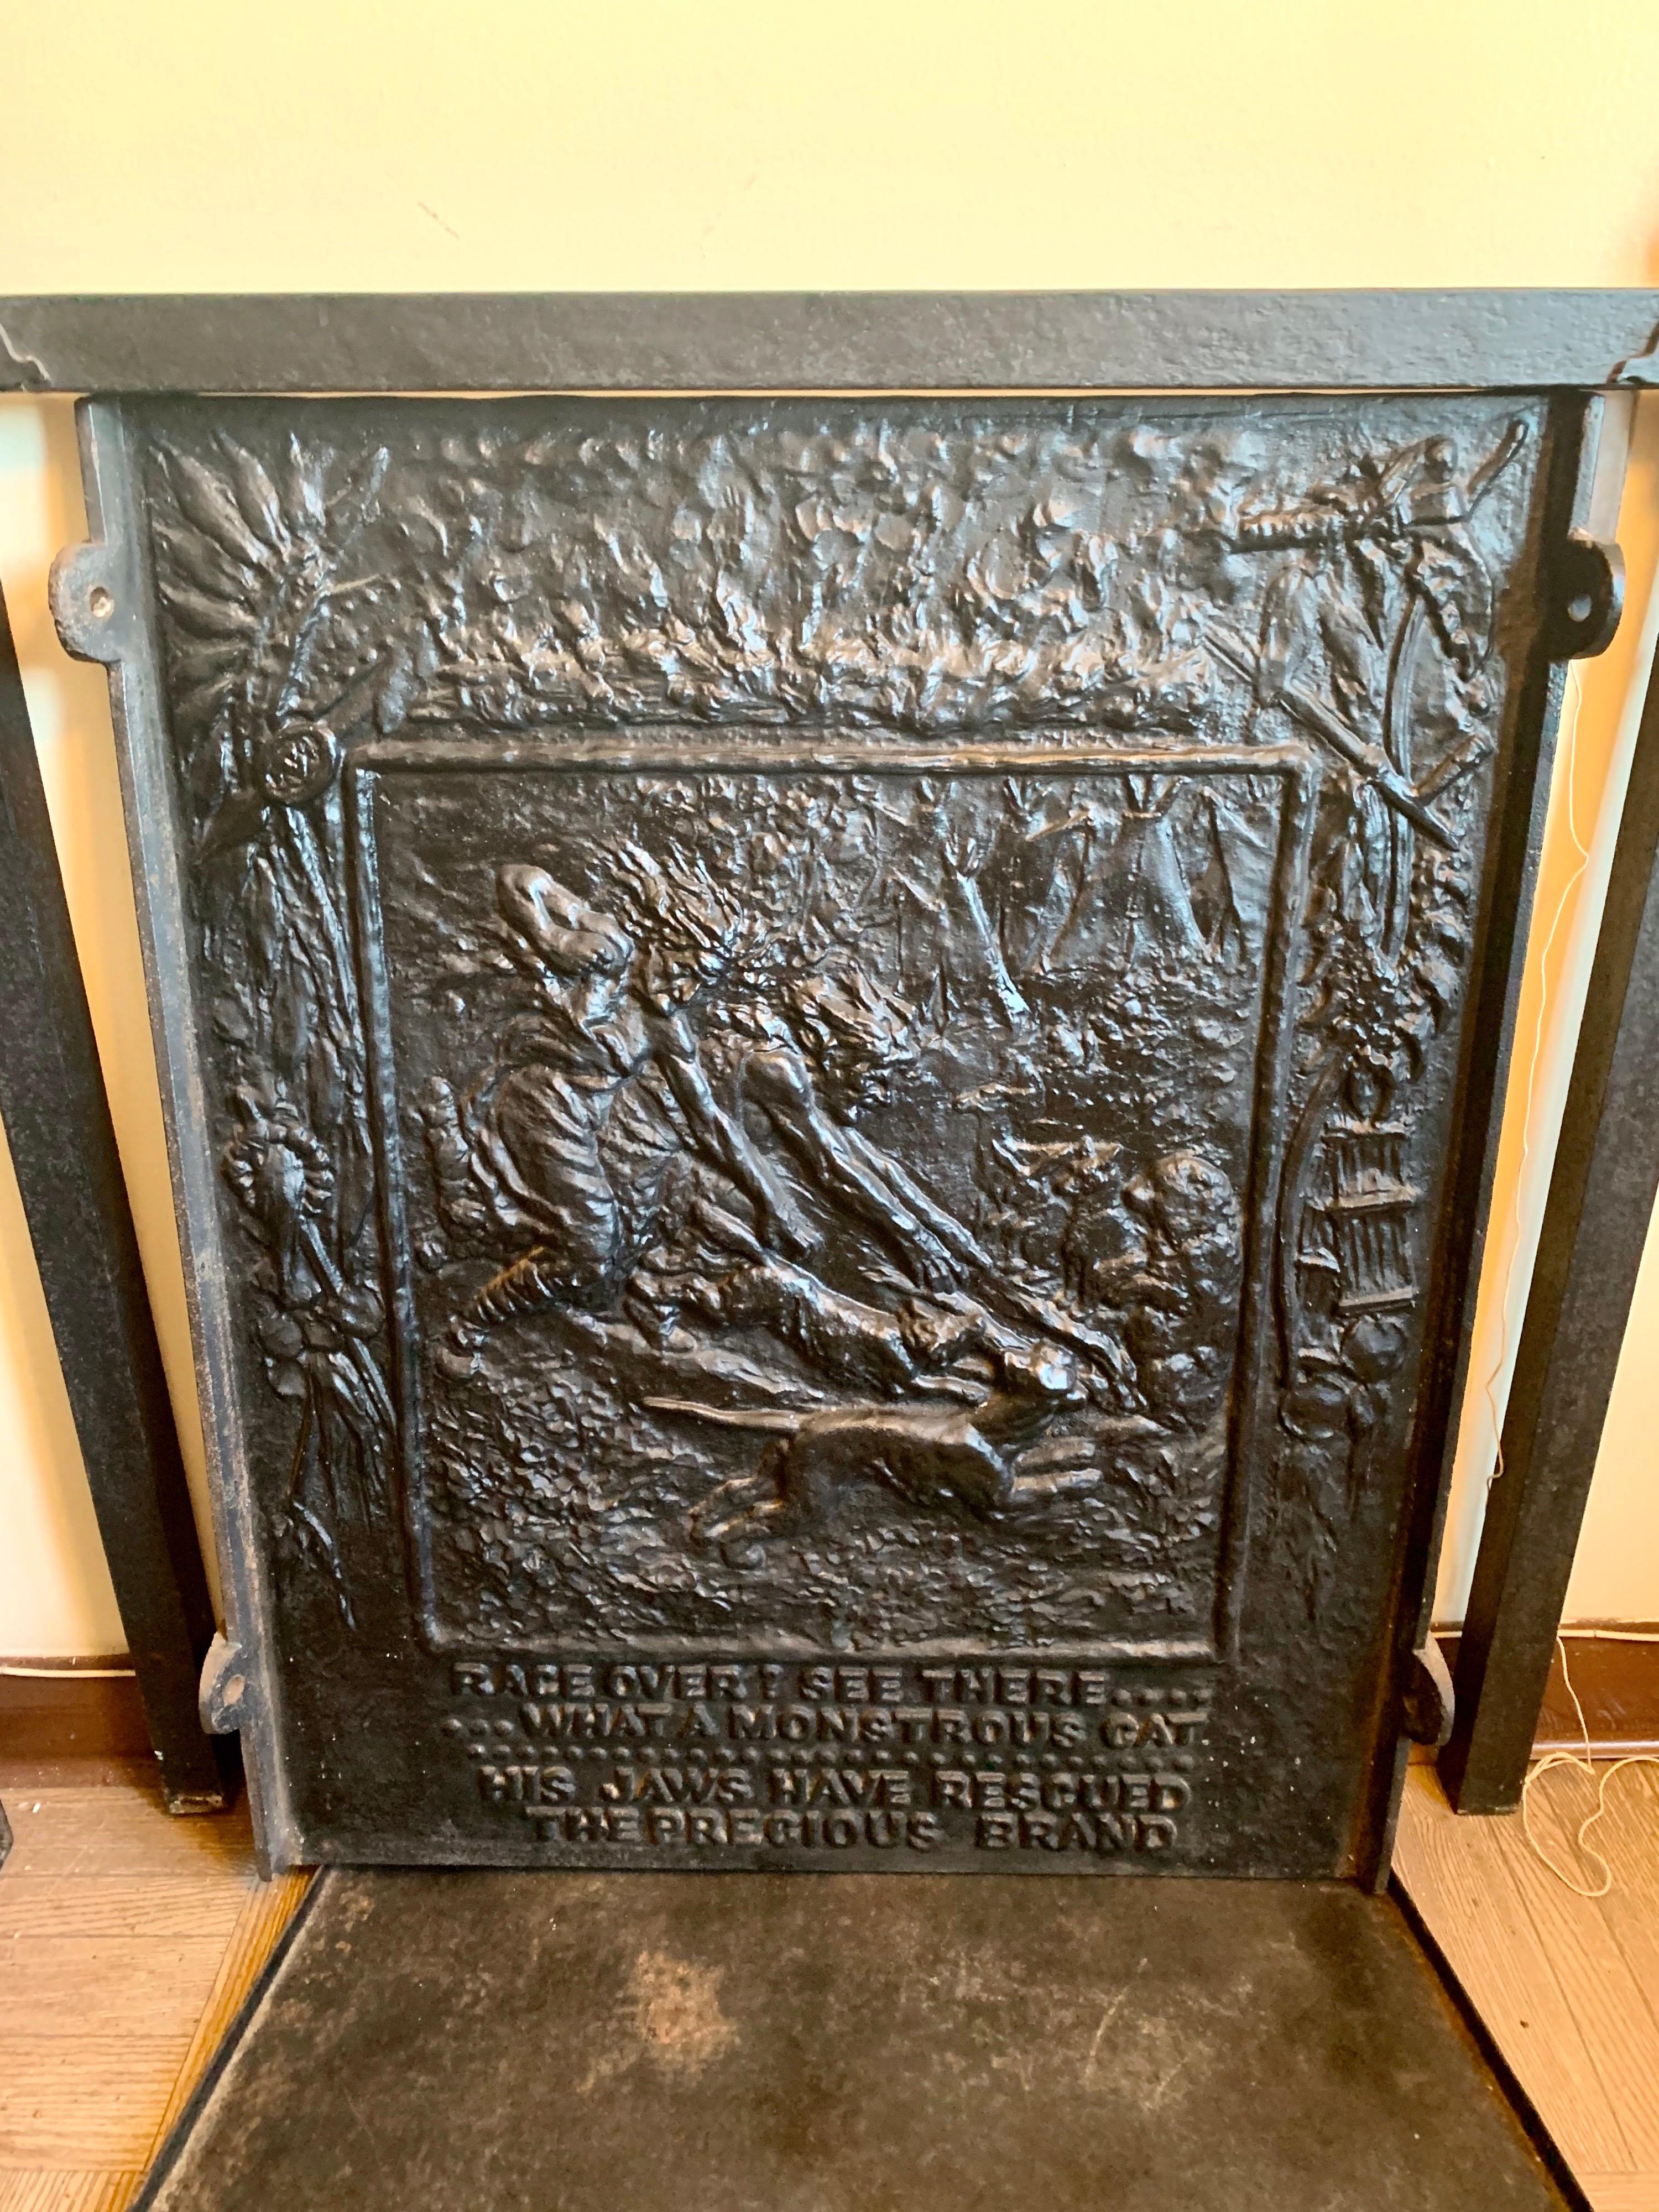 Historic three section cast iron fire back depicting Cahroc Indians of Calif. They are known as Romans of Northern Calif. Fire back has a frame, 3 panels and a front floor panel. Original stove black color.
Below scenes there are descriptions. Can